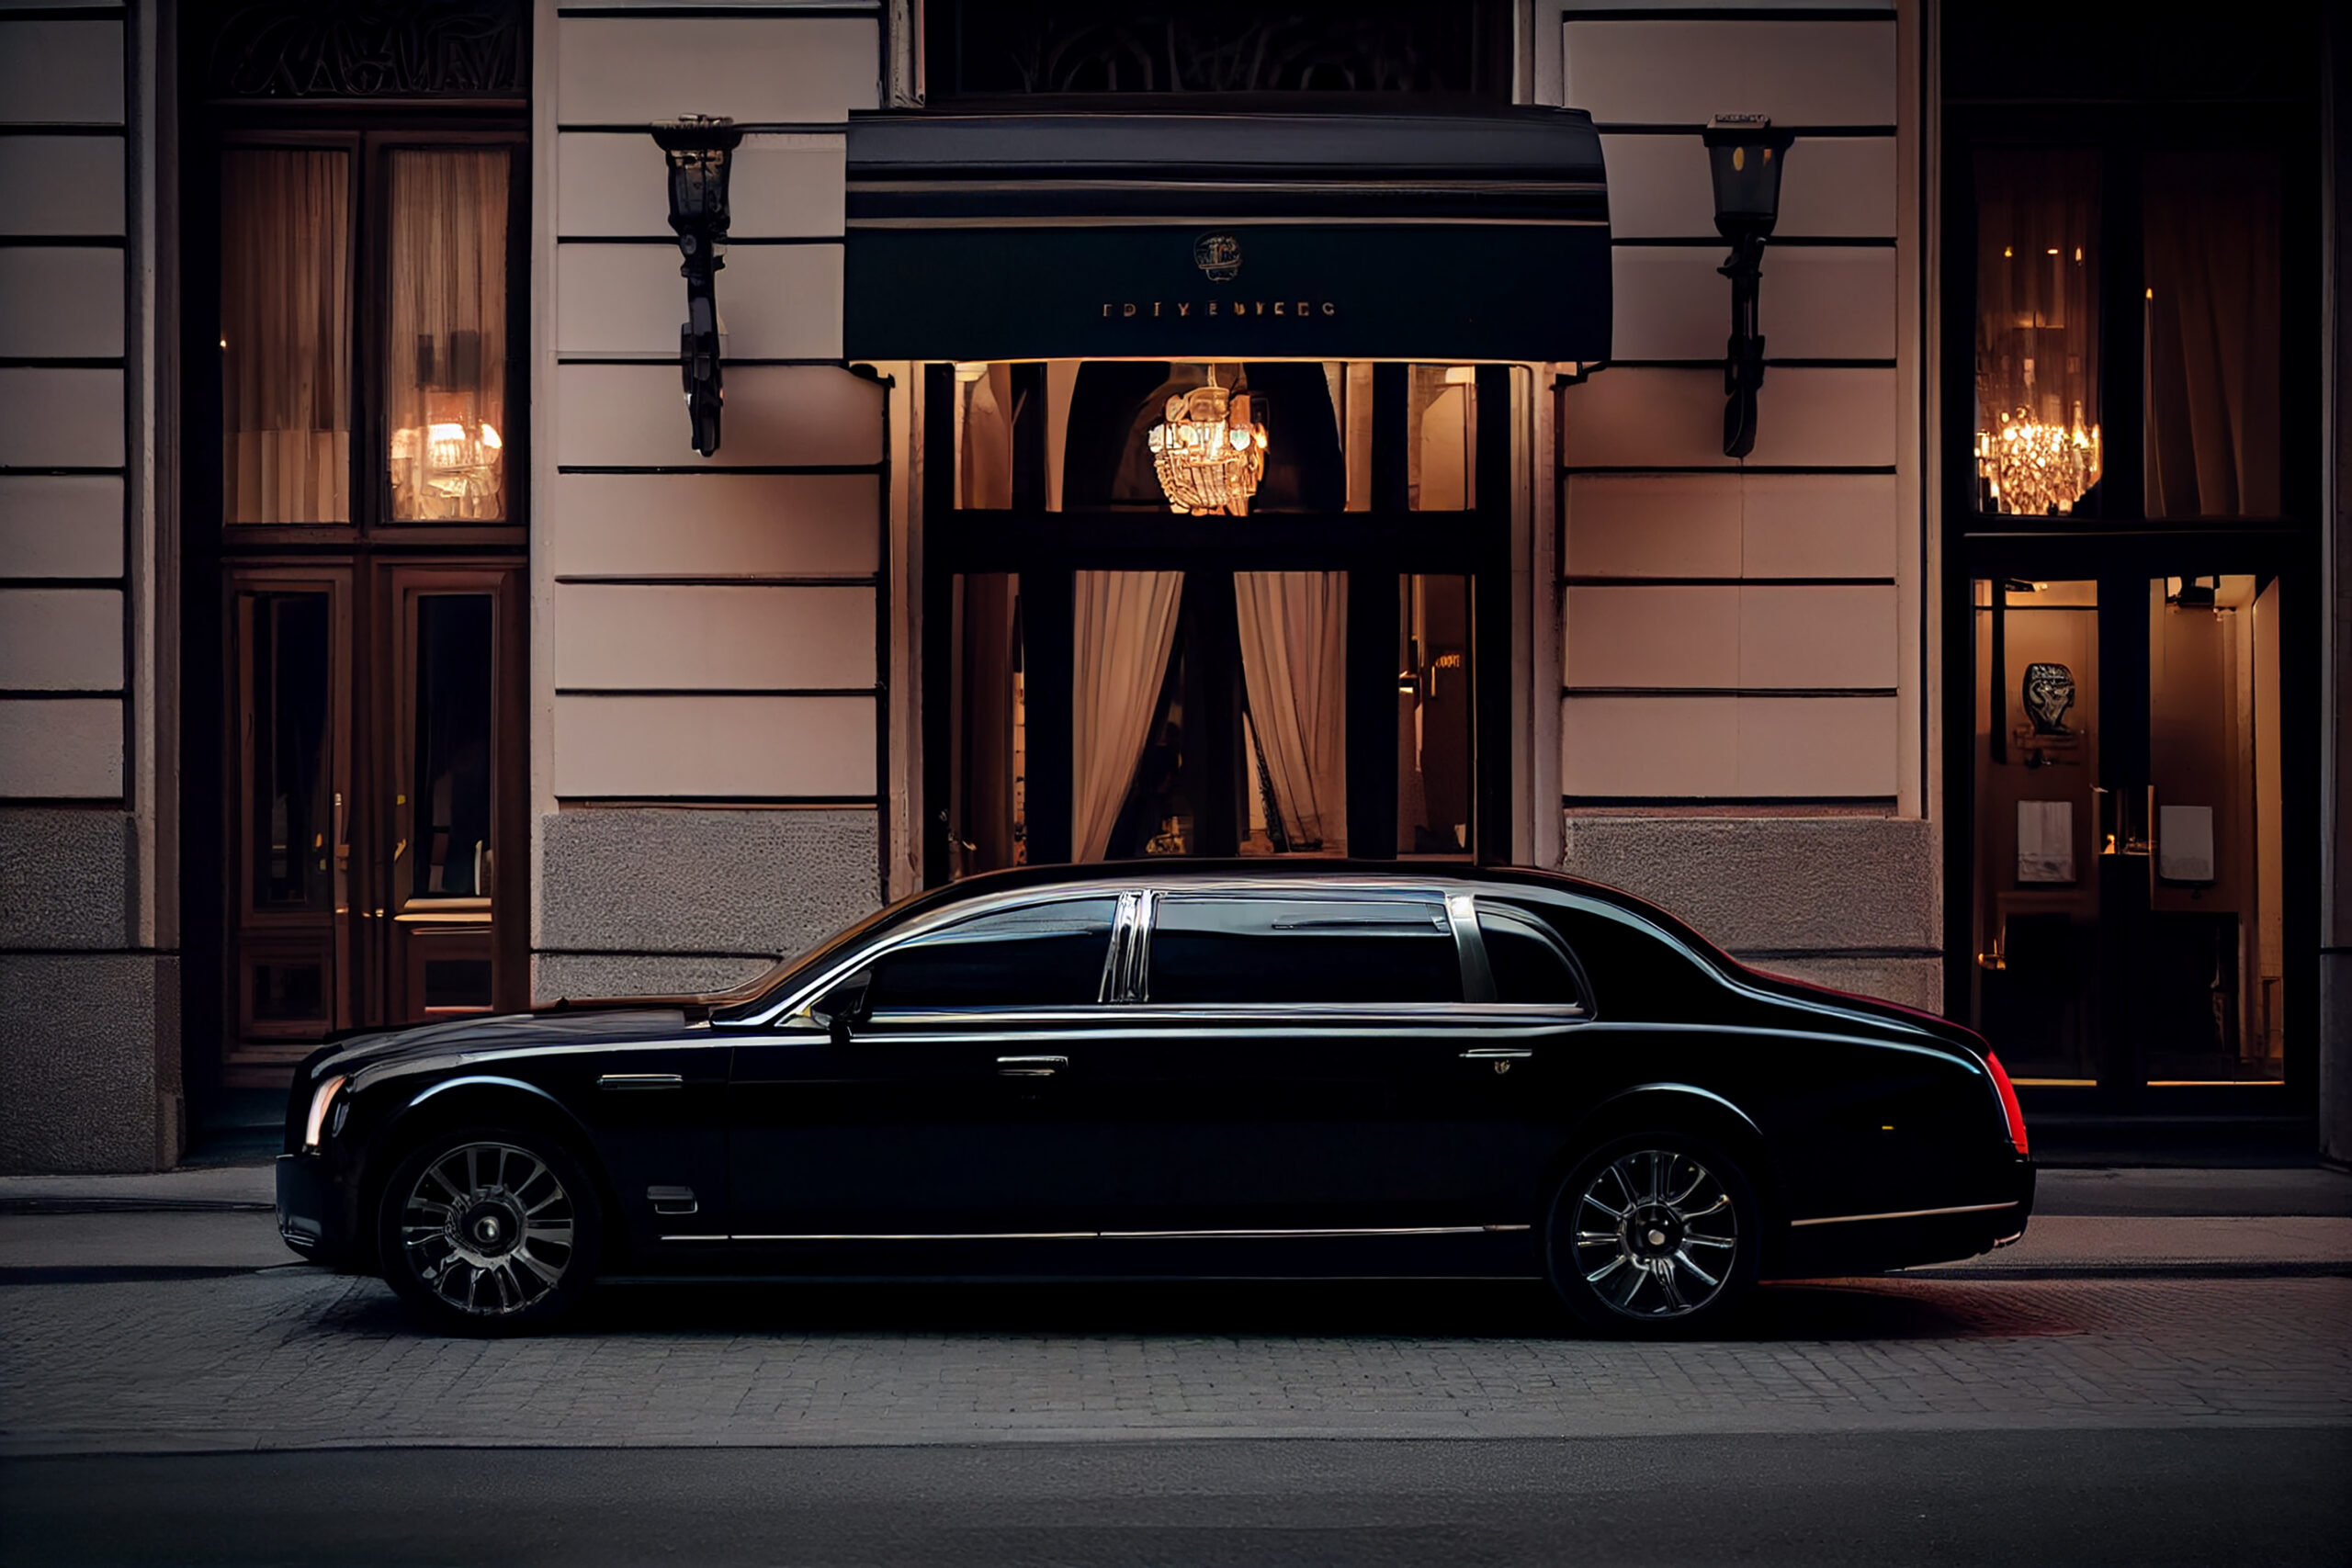 A sleek black luxury rental car is parked outside a high-end store.